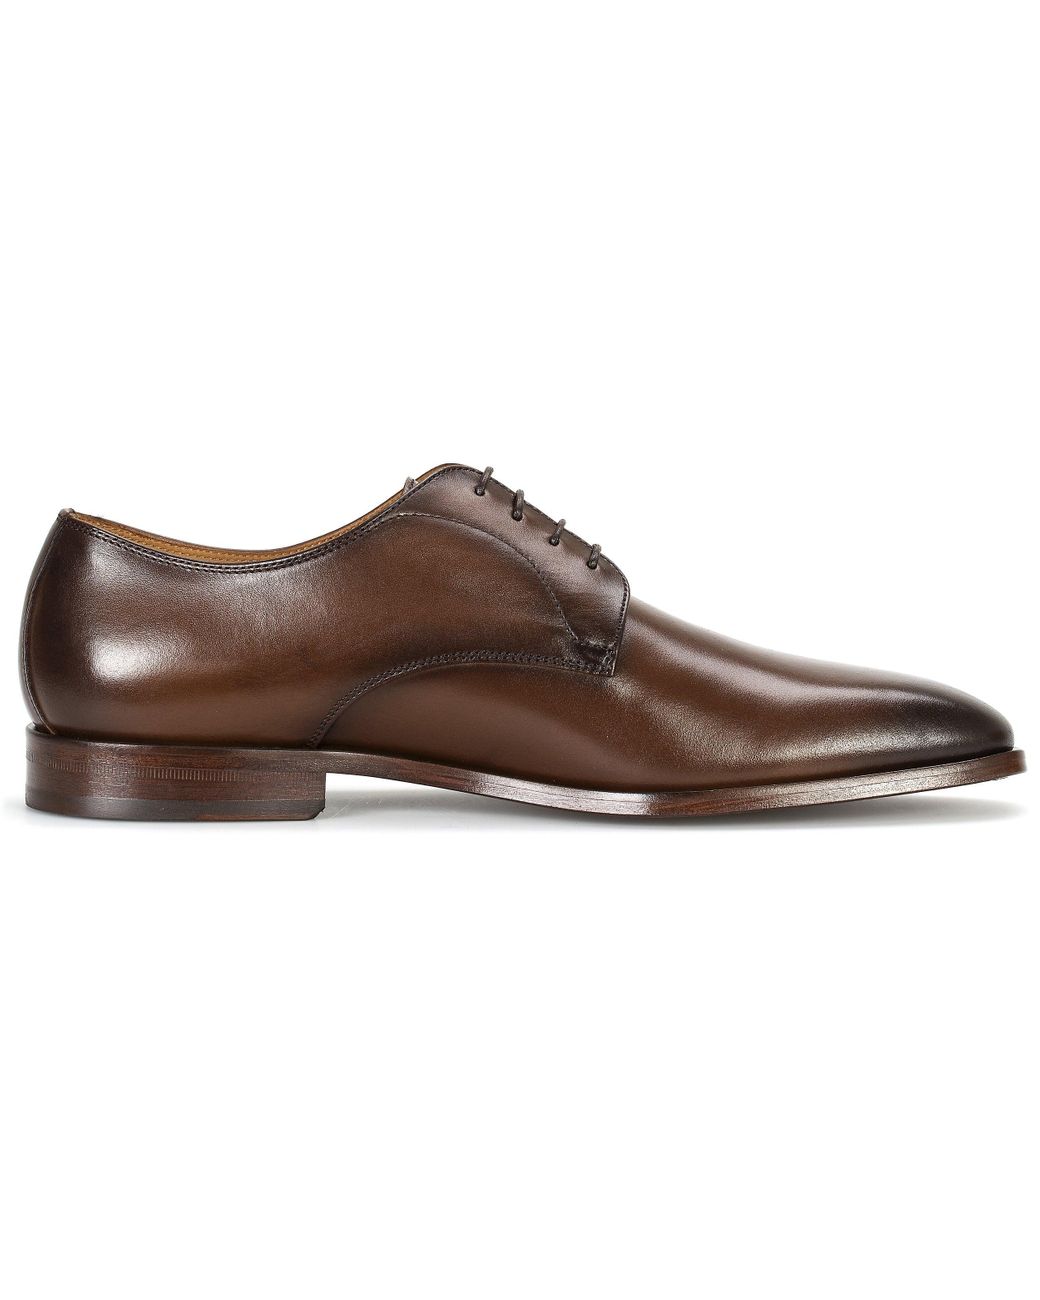 Hugo Boss Smart Derby ltpr shoes Made in Portugal 100% Leather 